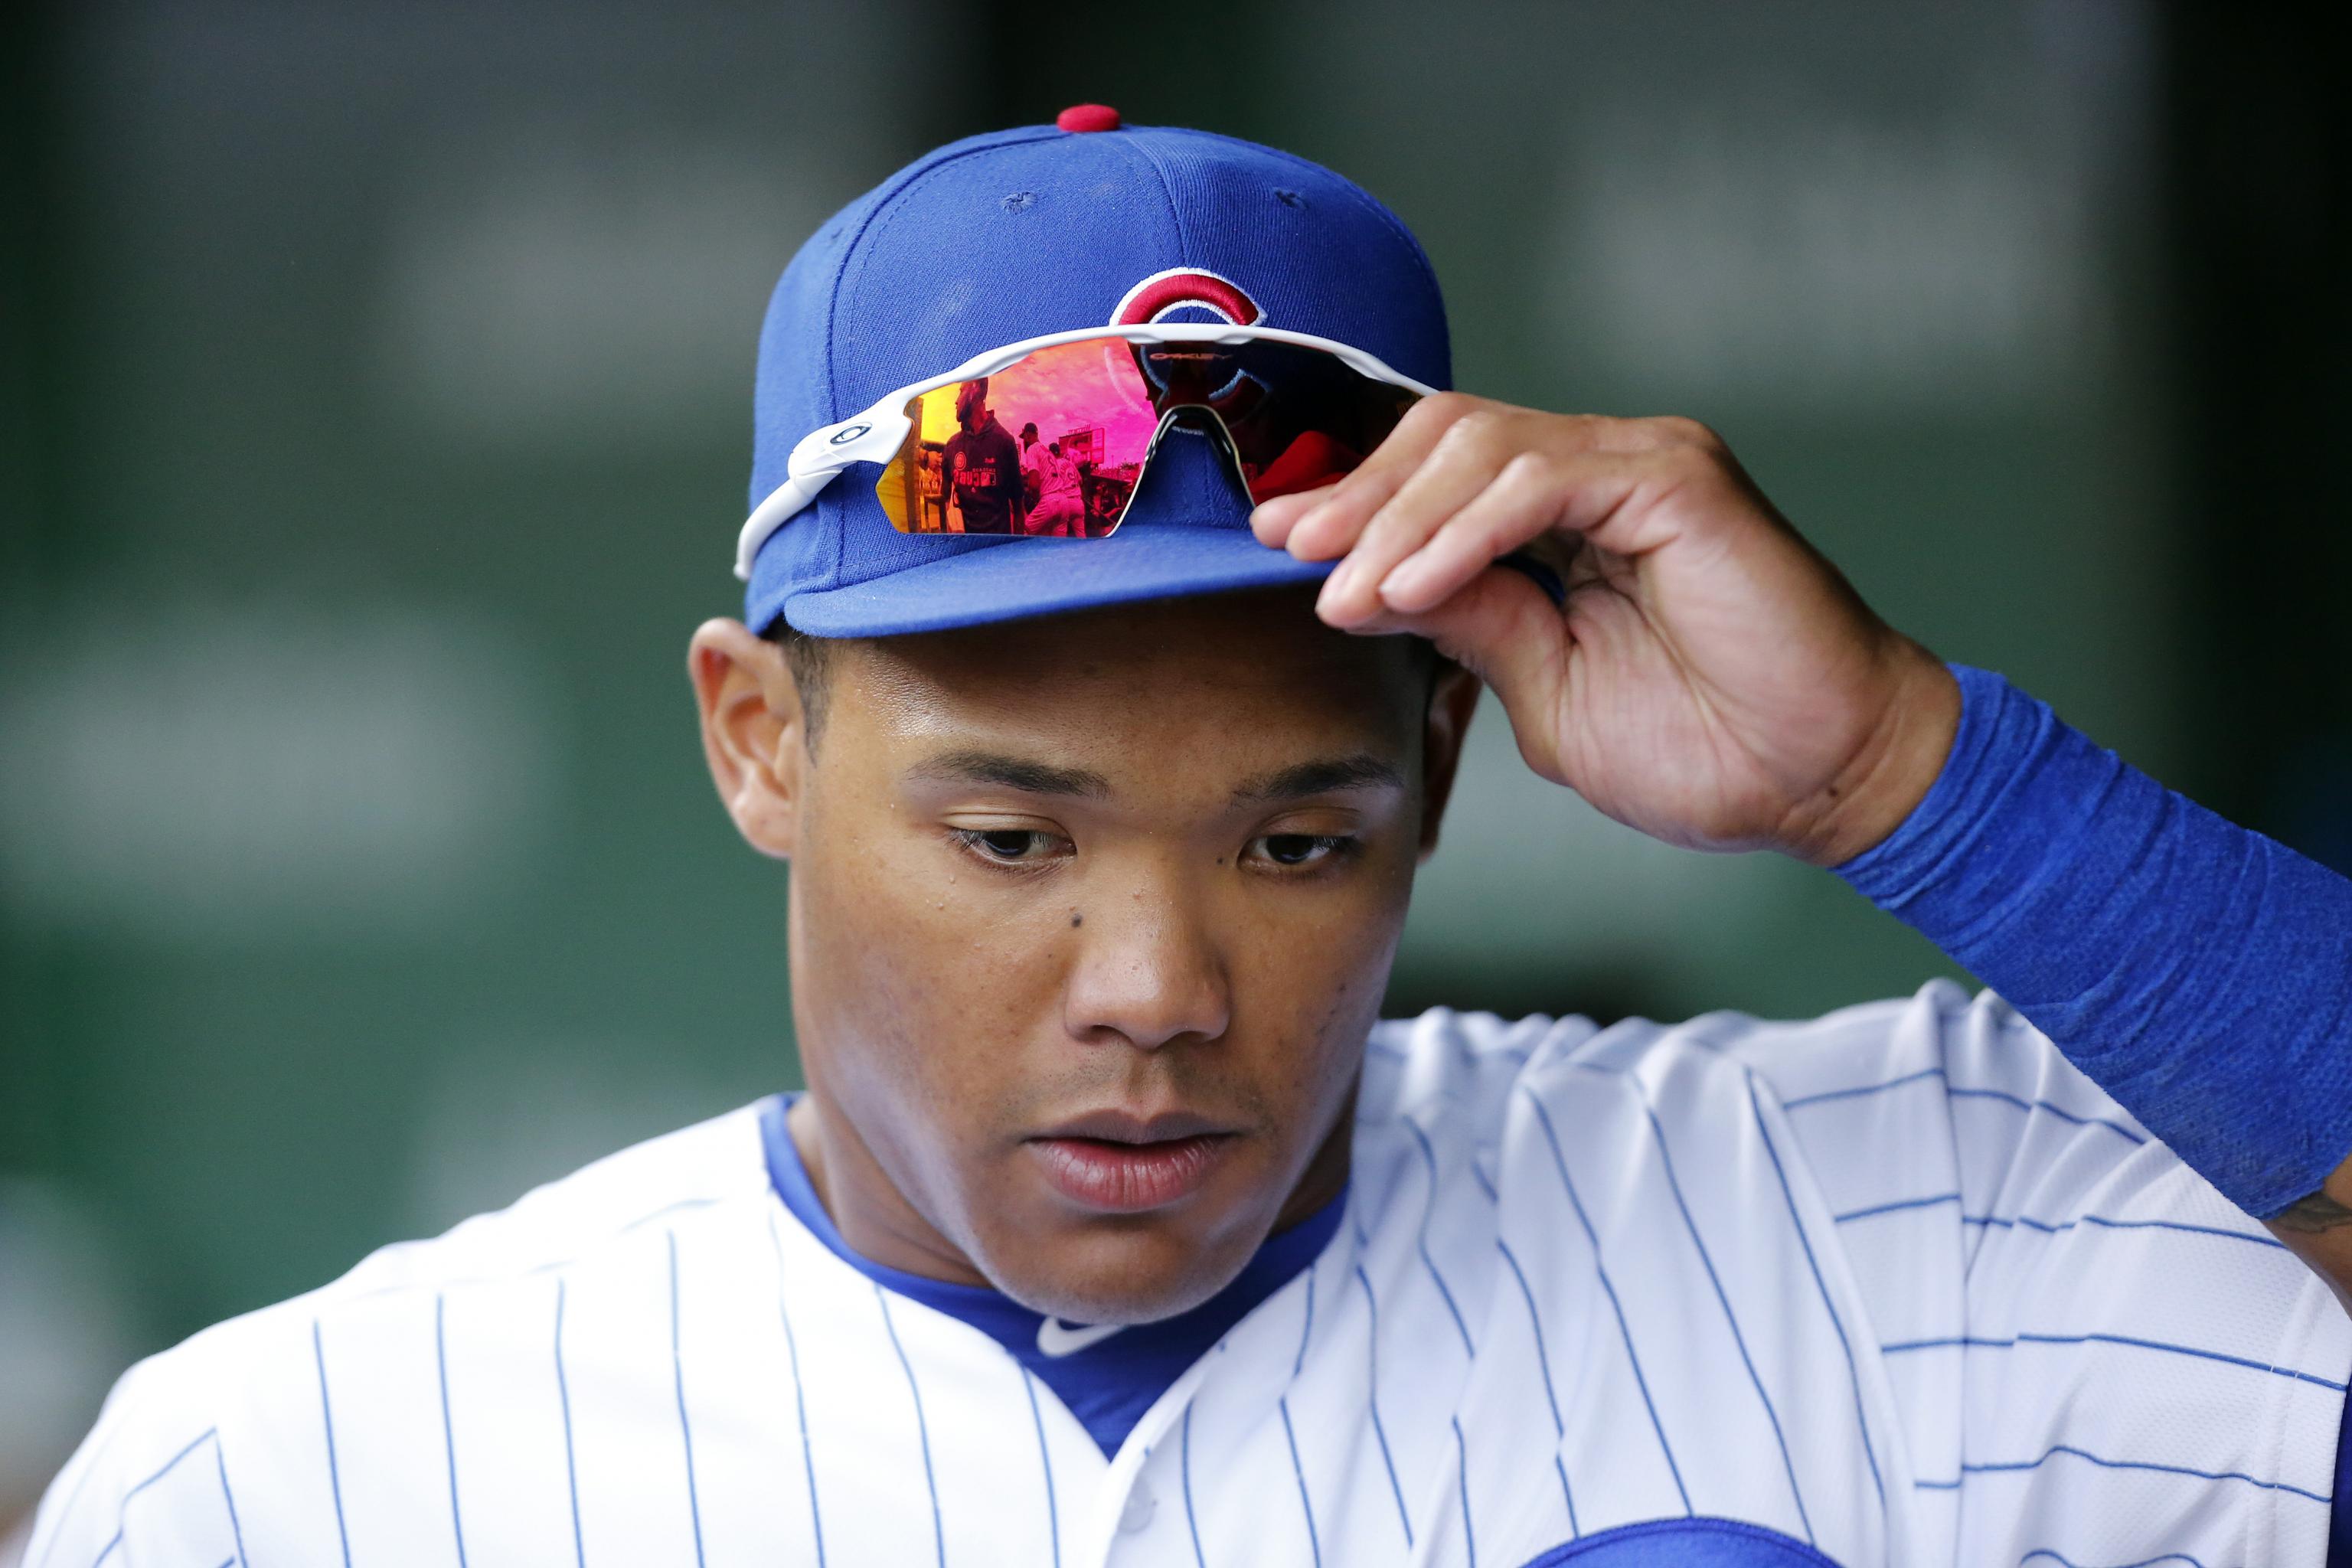 MLB trade rumors: Tigers interested in Addison Russell, per report